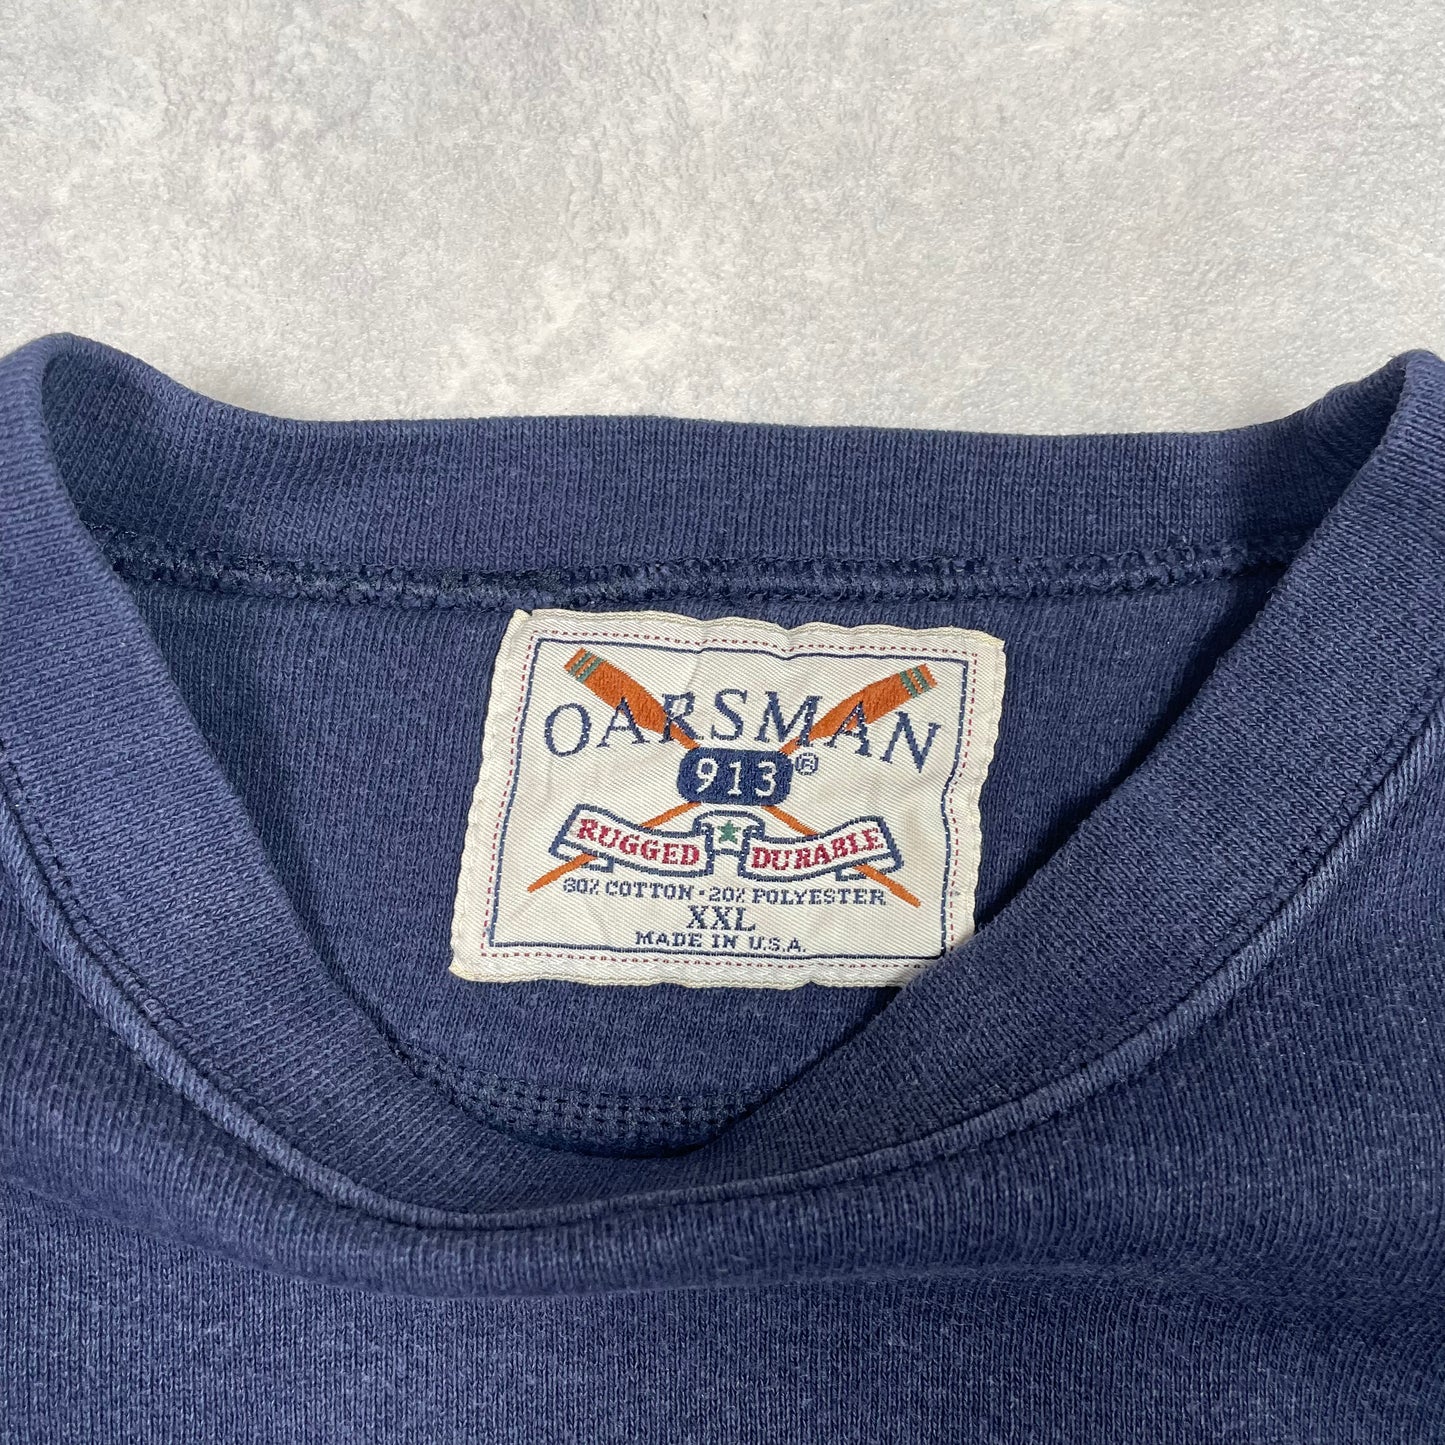 Vintage Sweater ”Wroxton College” Oarsman Navy Made in USA